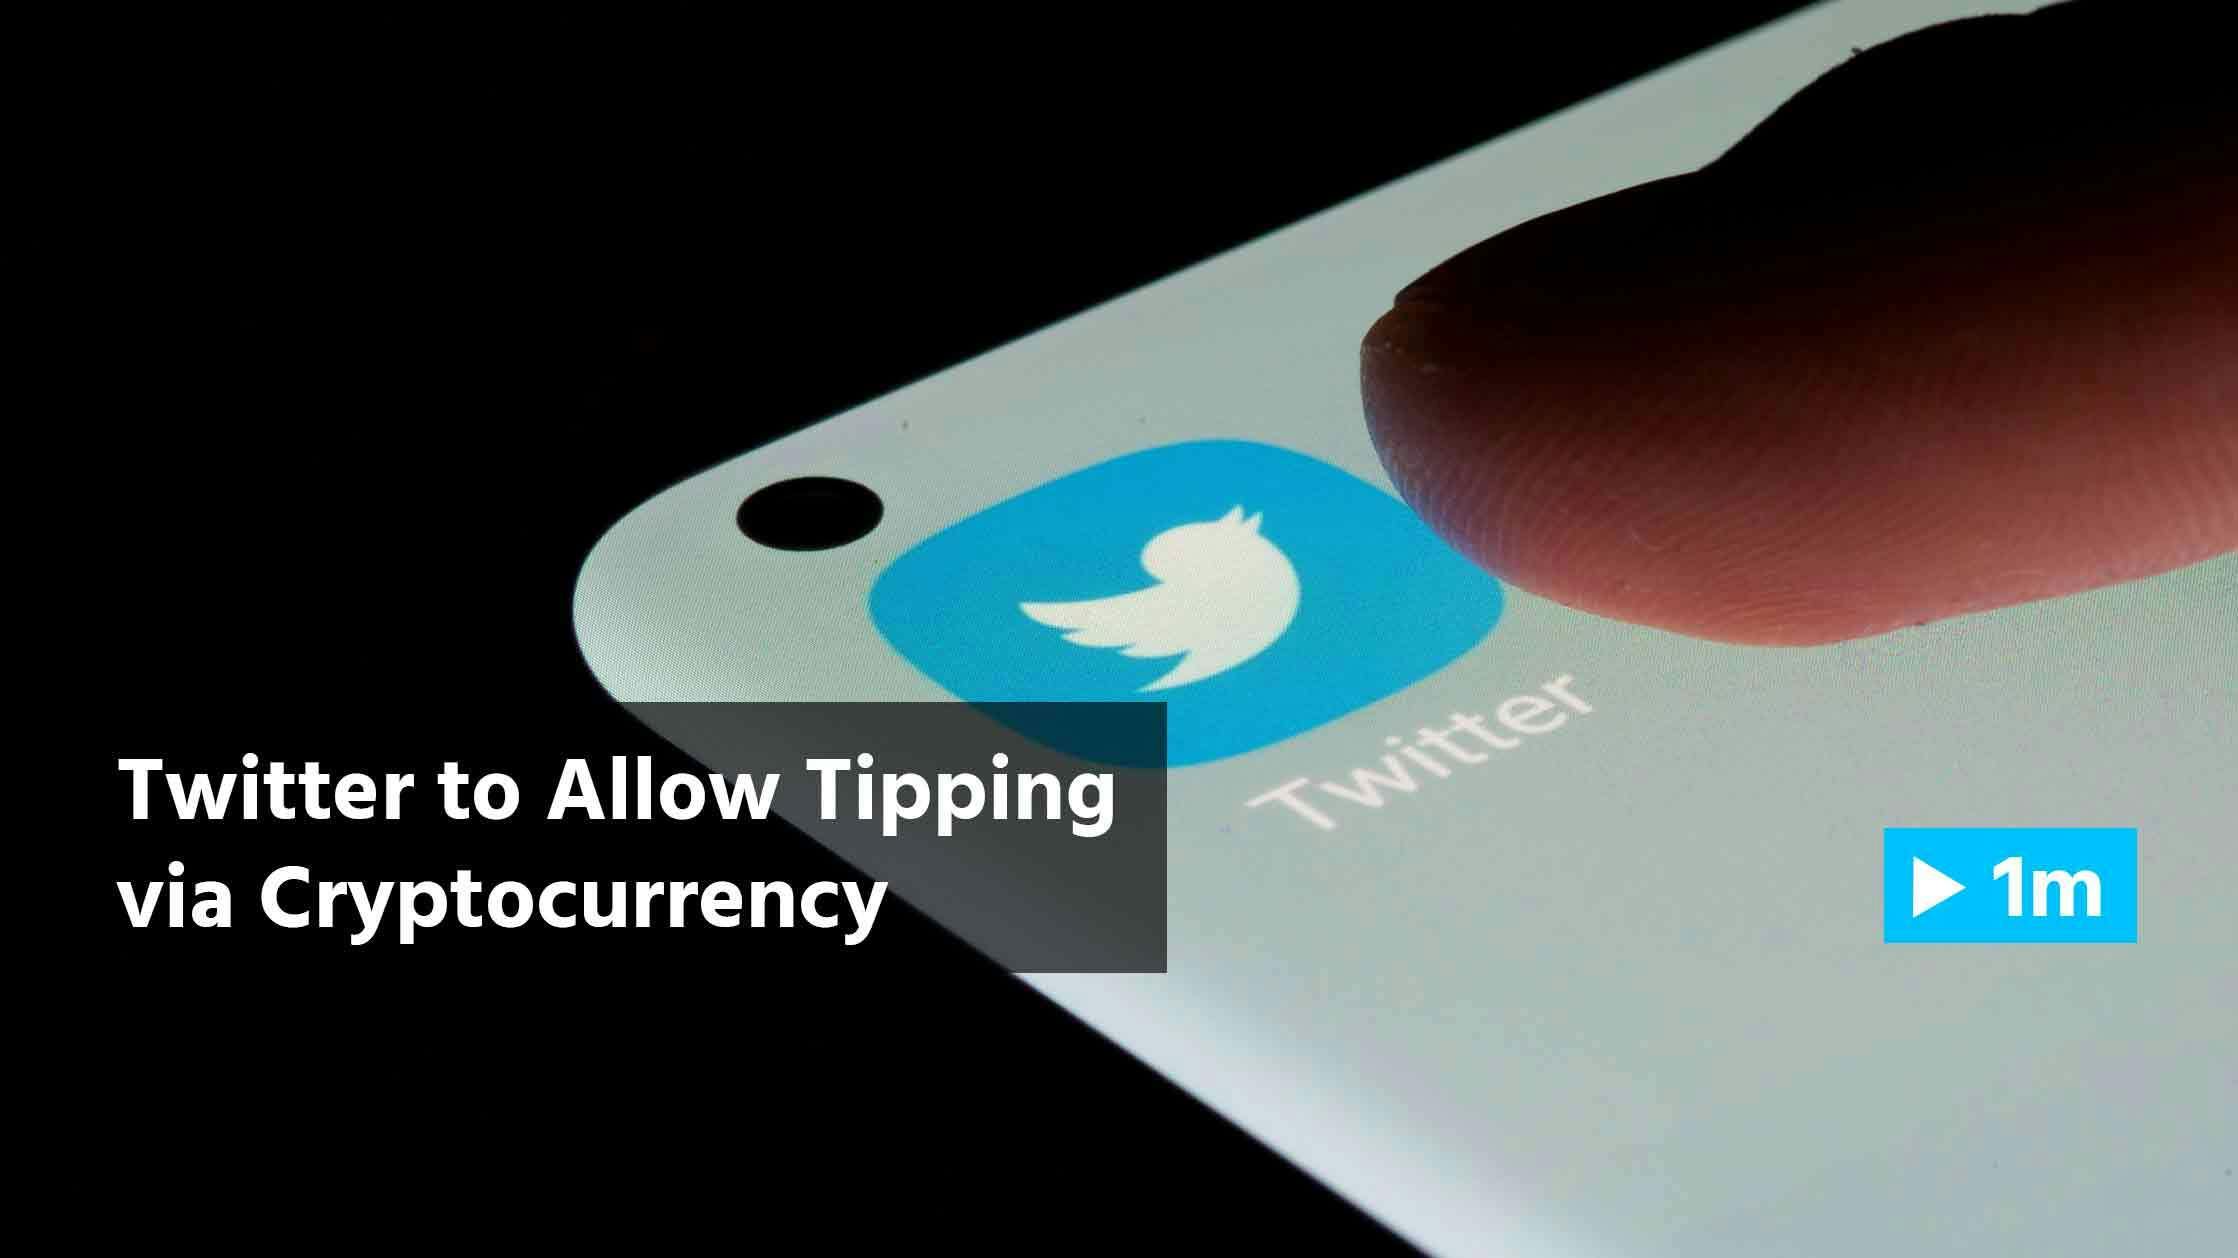 Reuters Report: Twitter to allow tipping via cryptocurrency